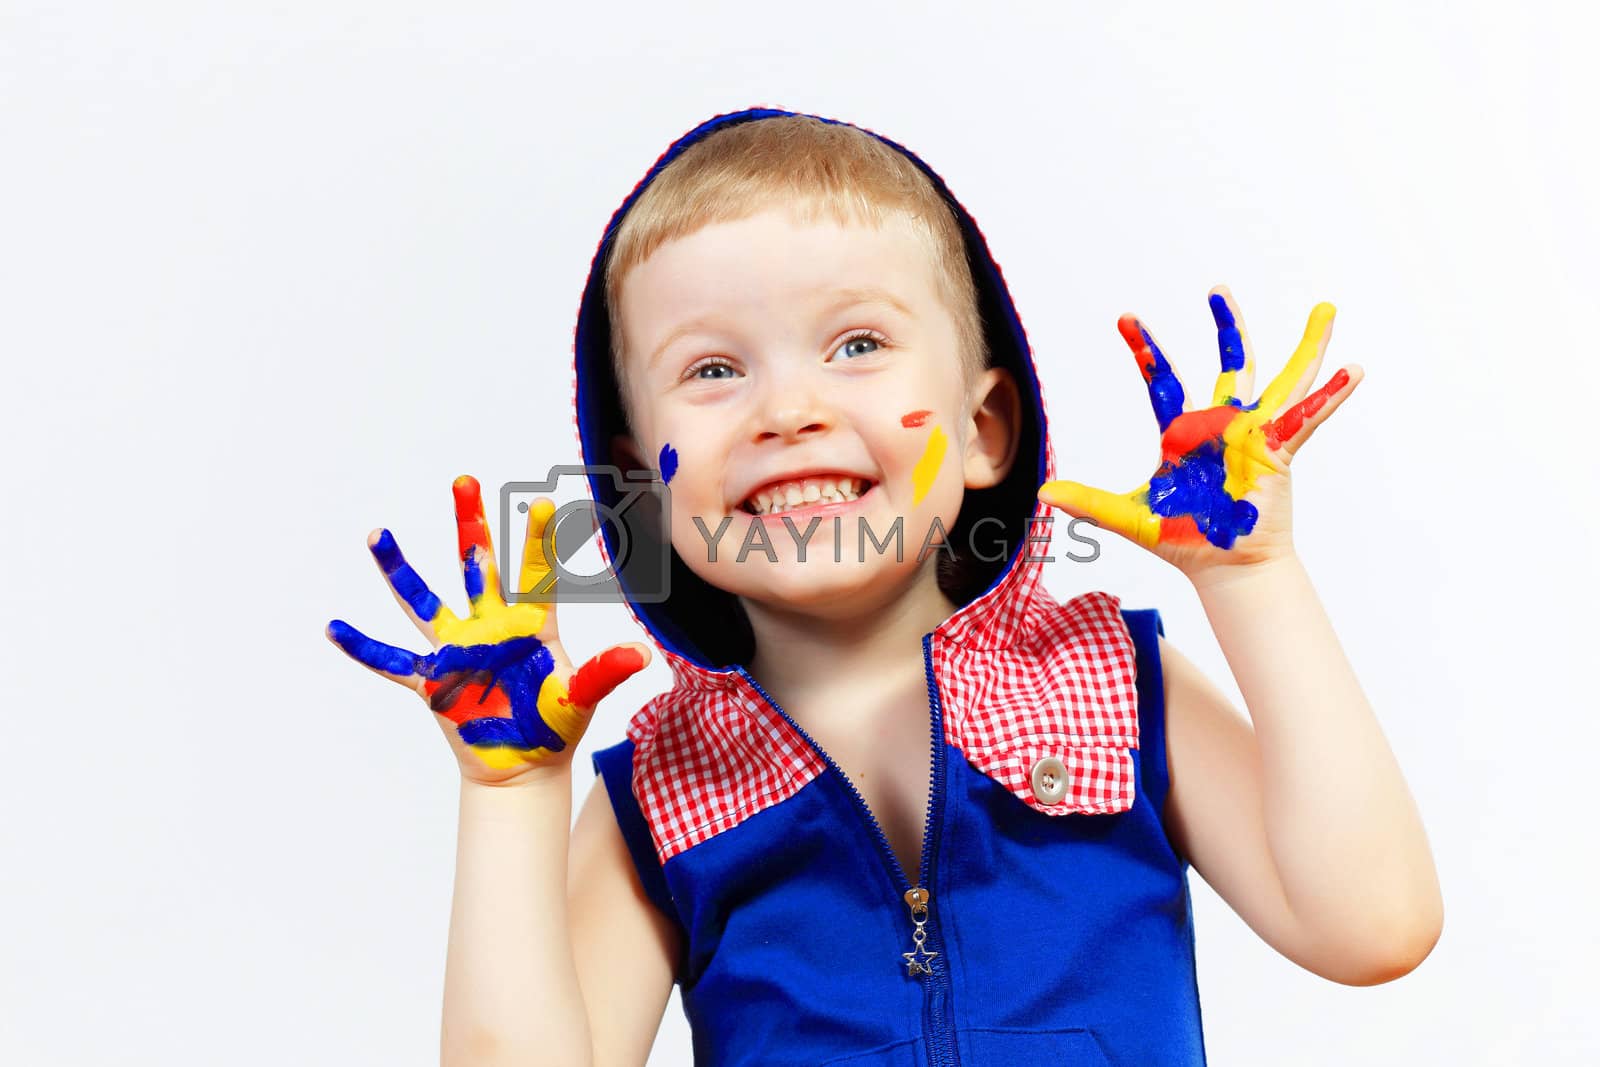 Royalty free image of happy child with paint on the hands by sergey_nivens